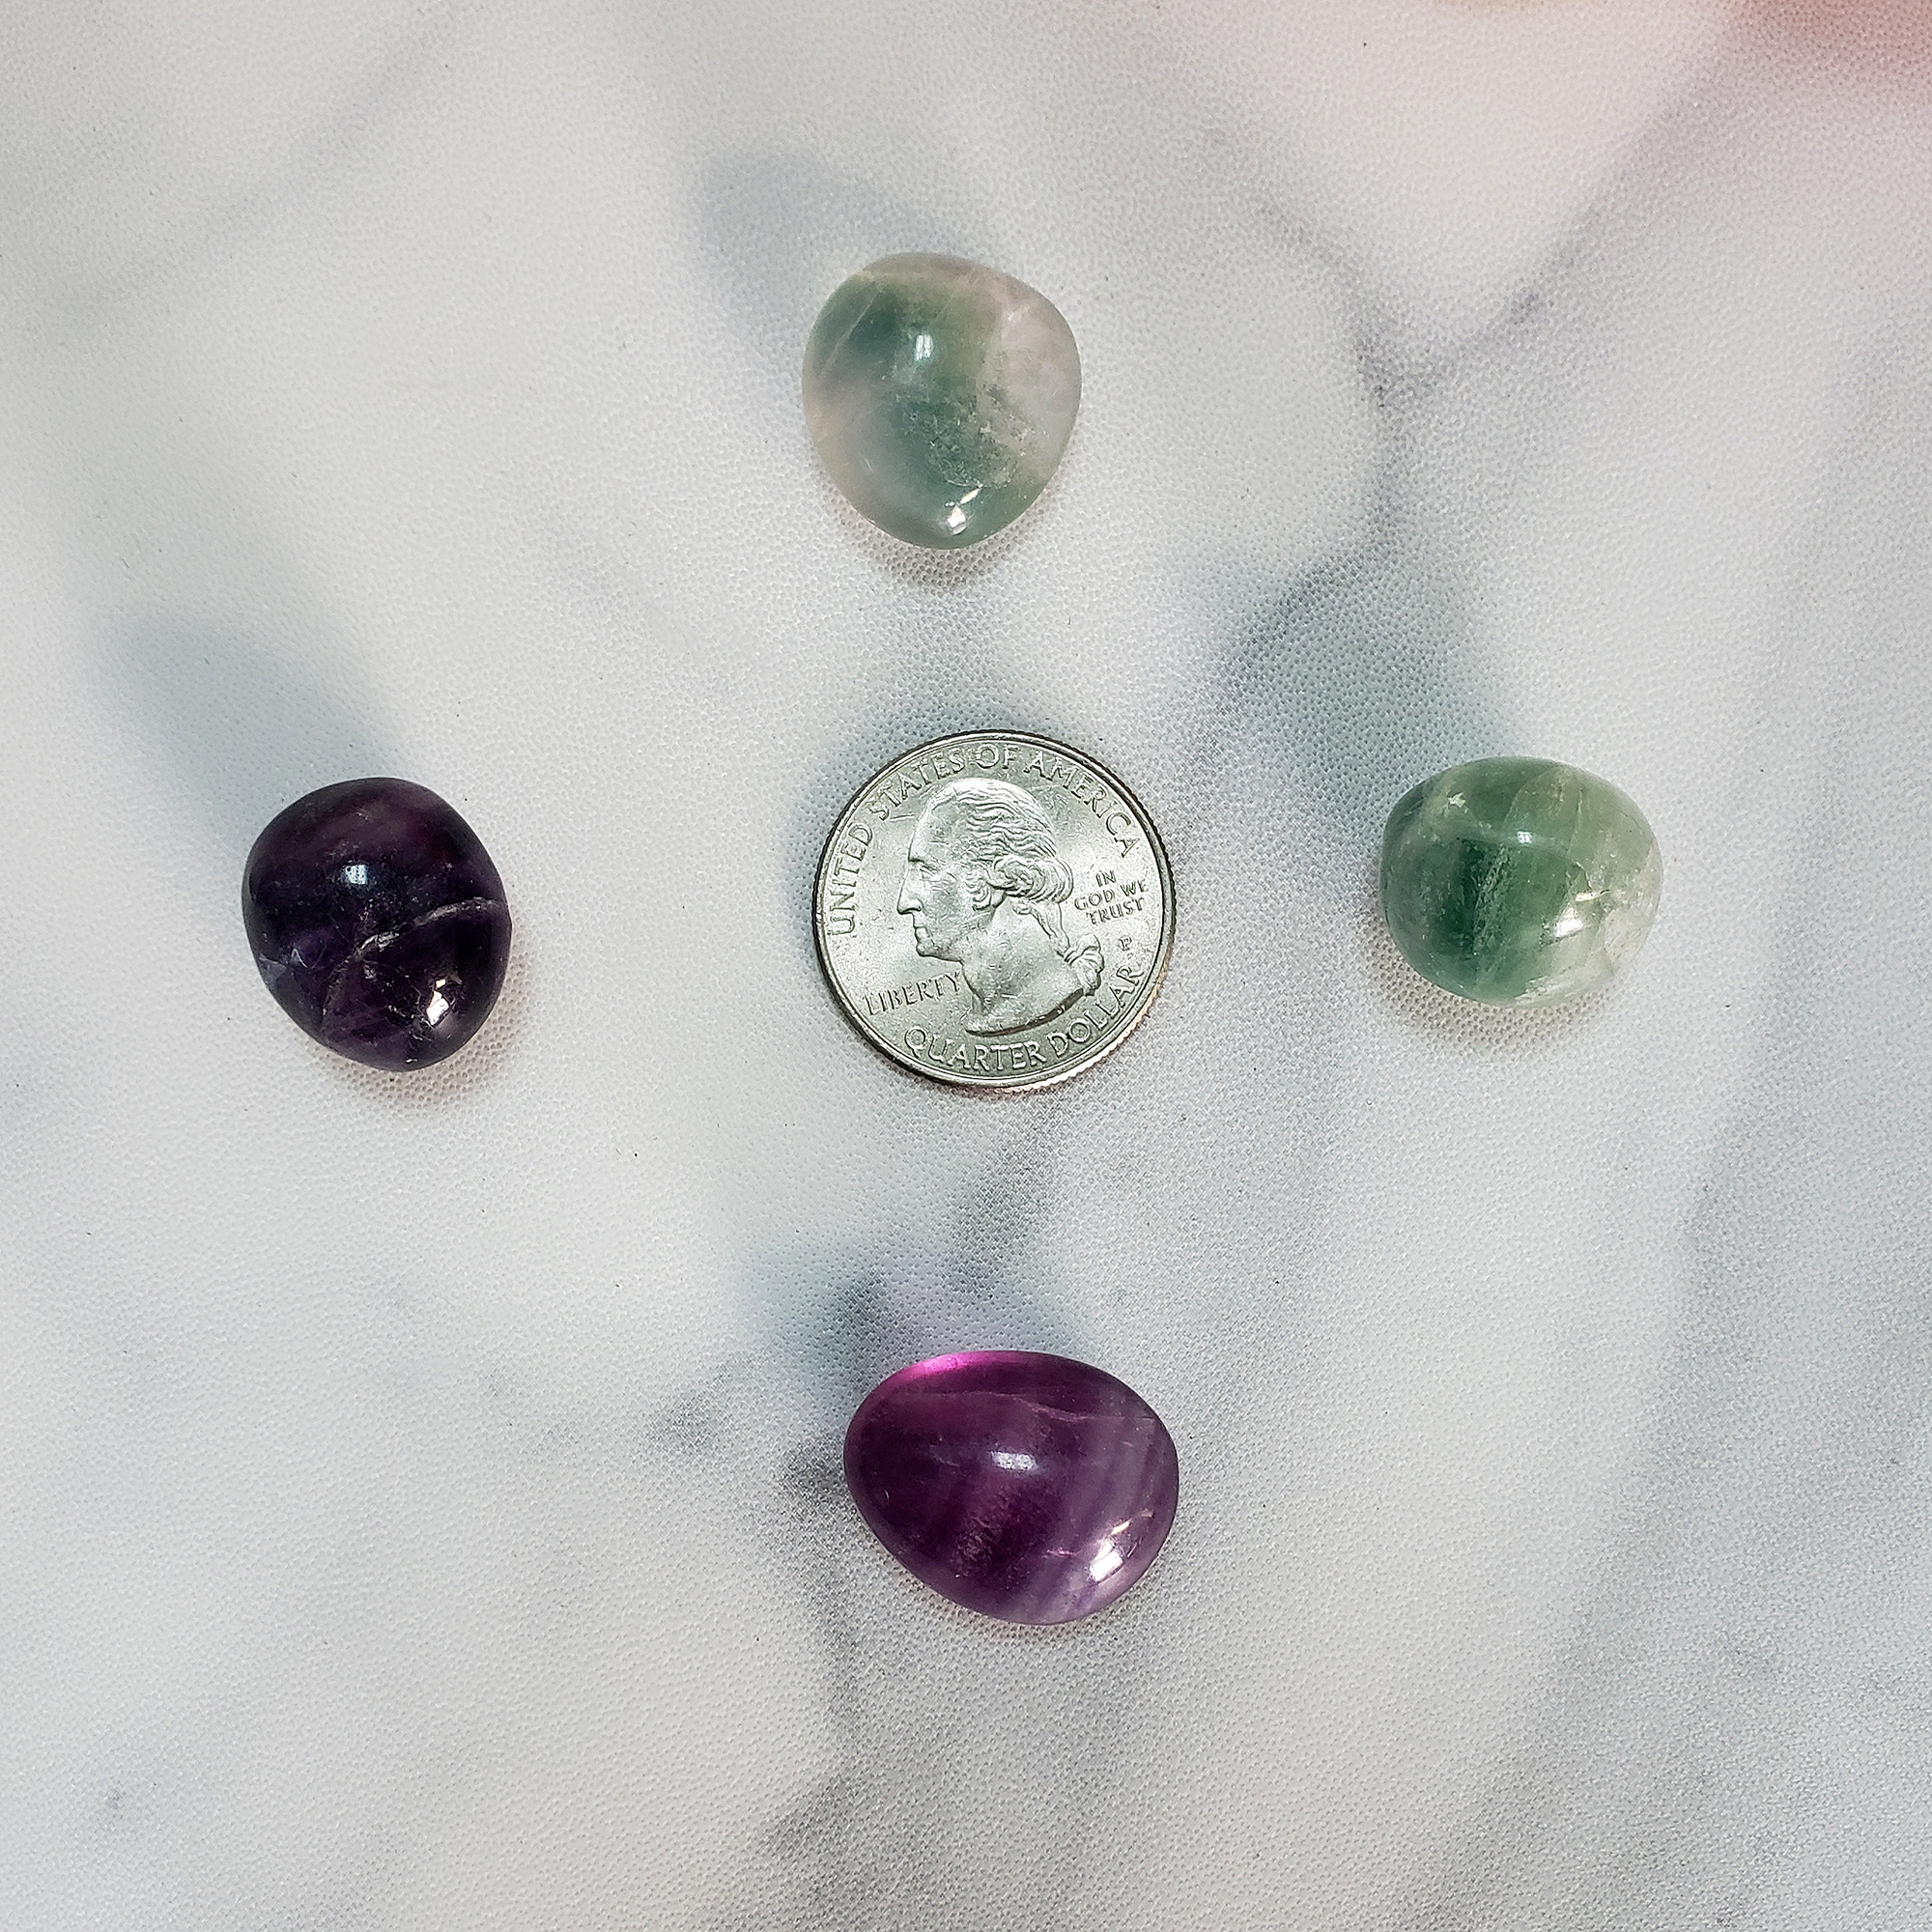 Fluorite Crystal Natural Gemstone Tumbled Stone | High Quality - Size Comparison